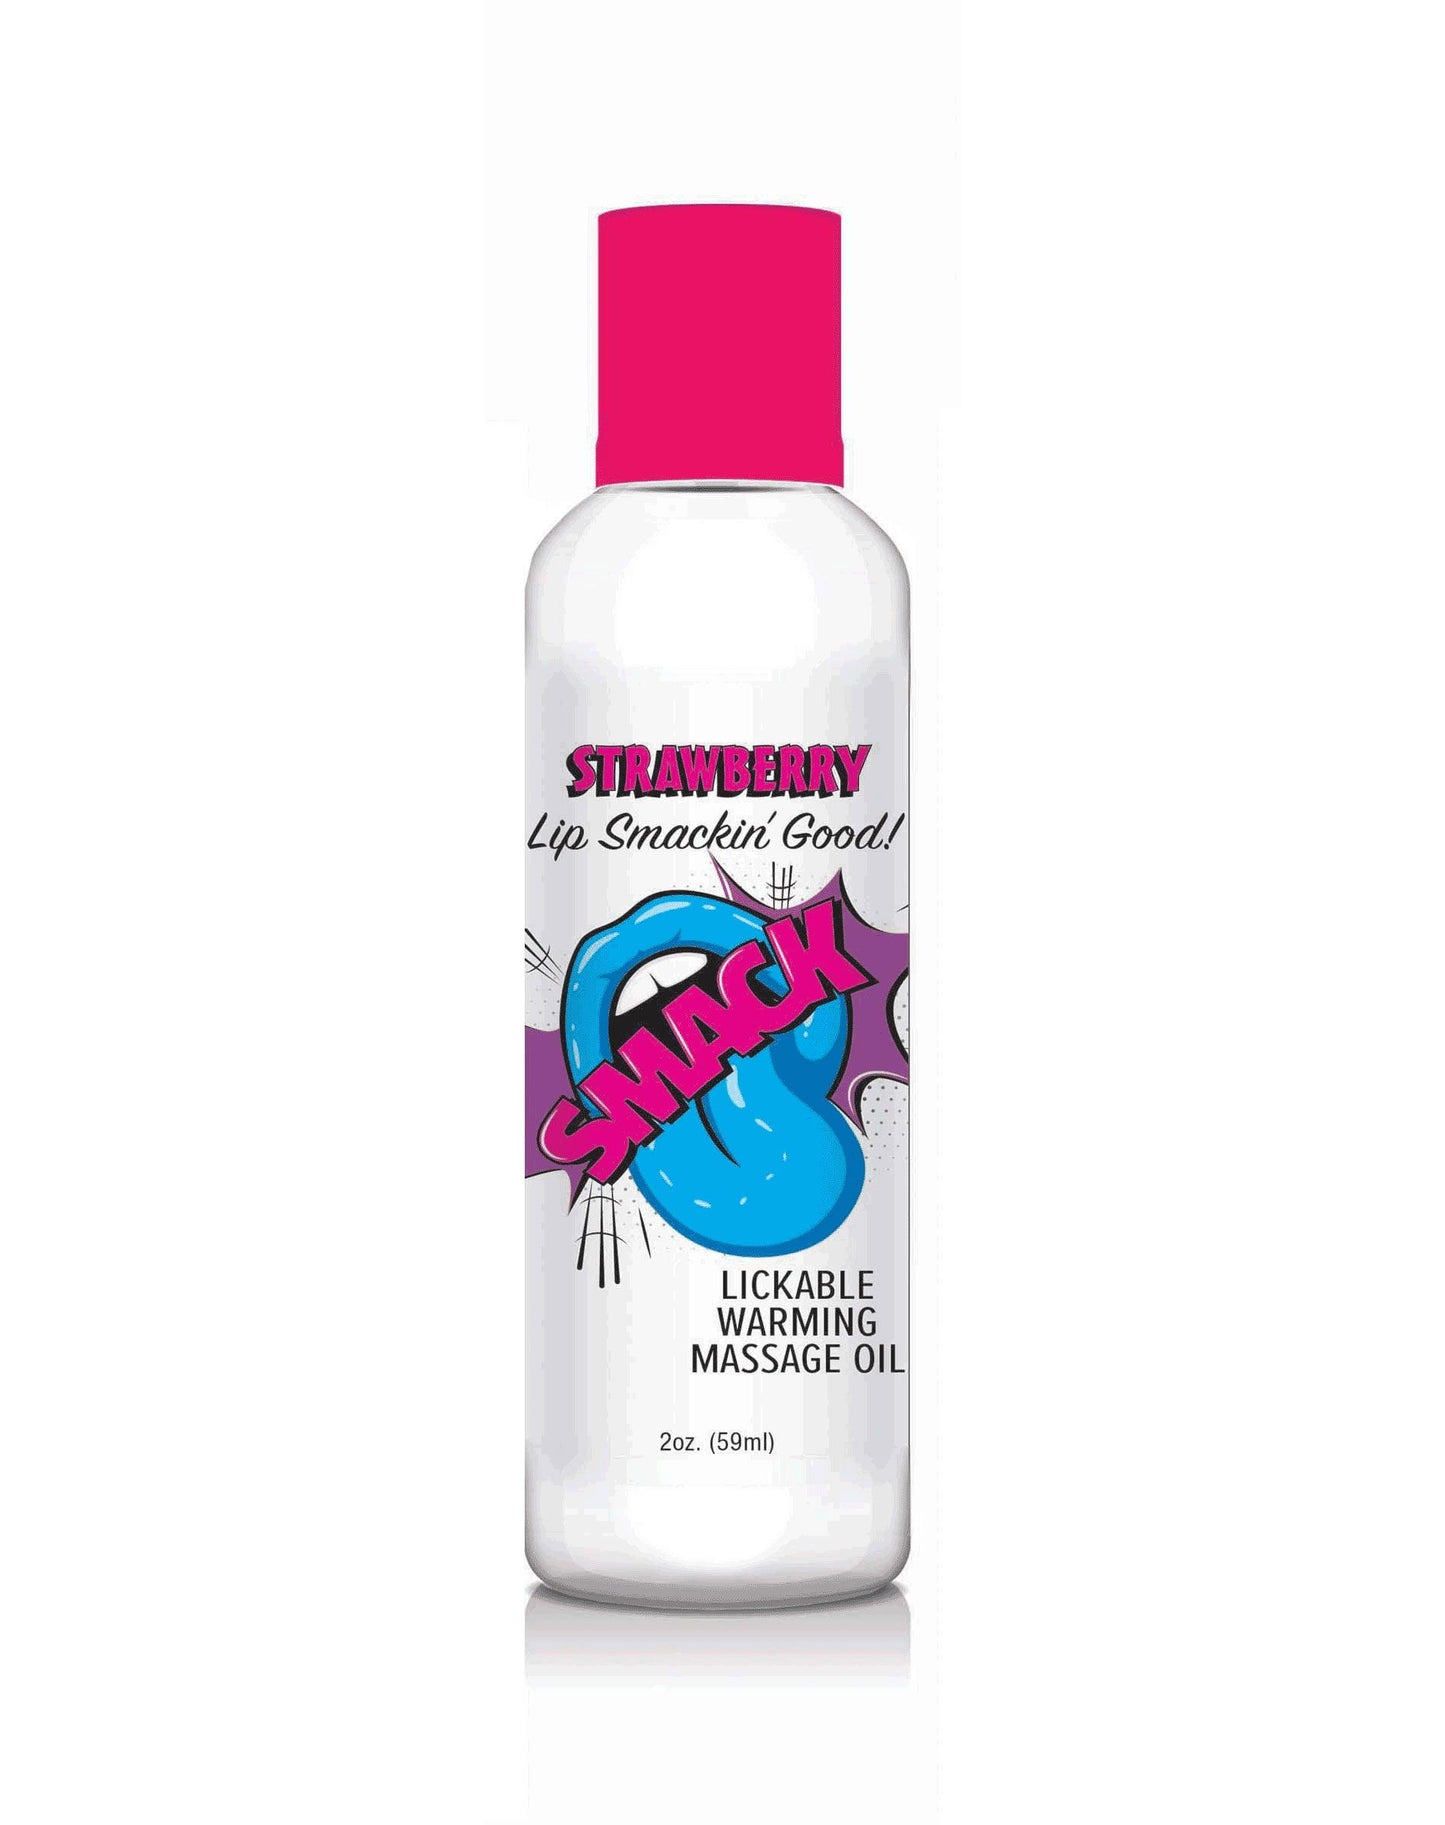 Smack Warming and Lickable Massage Oil - Strawberry 2 Oz - My Sex Toy Hub